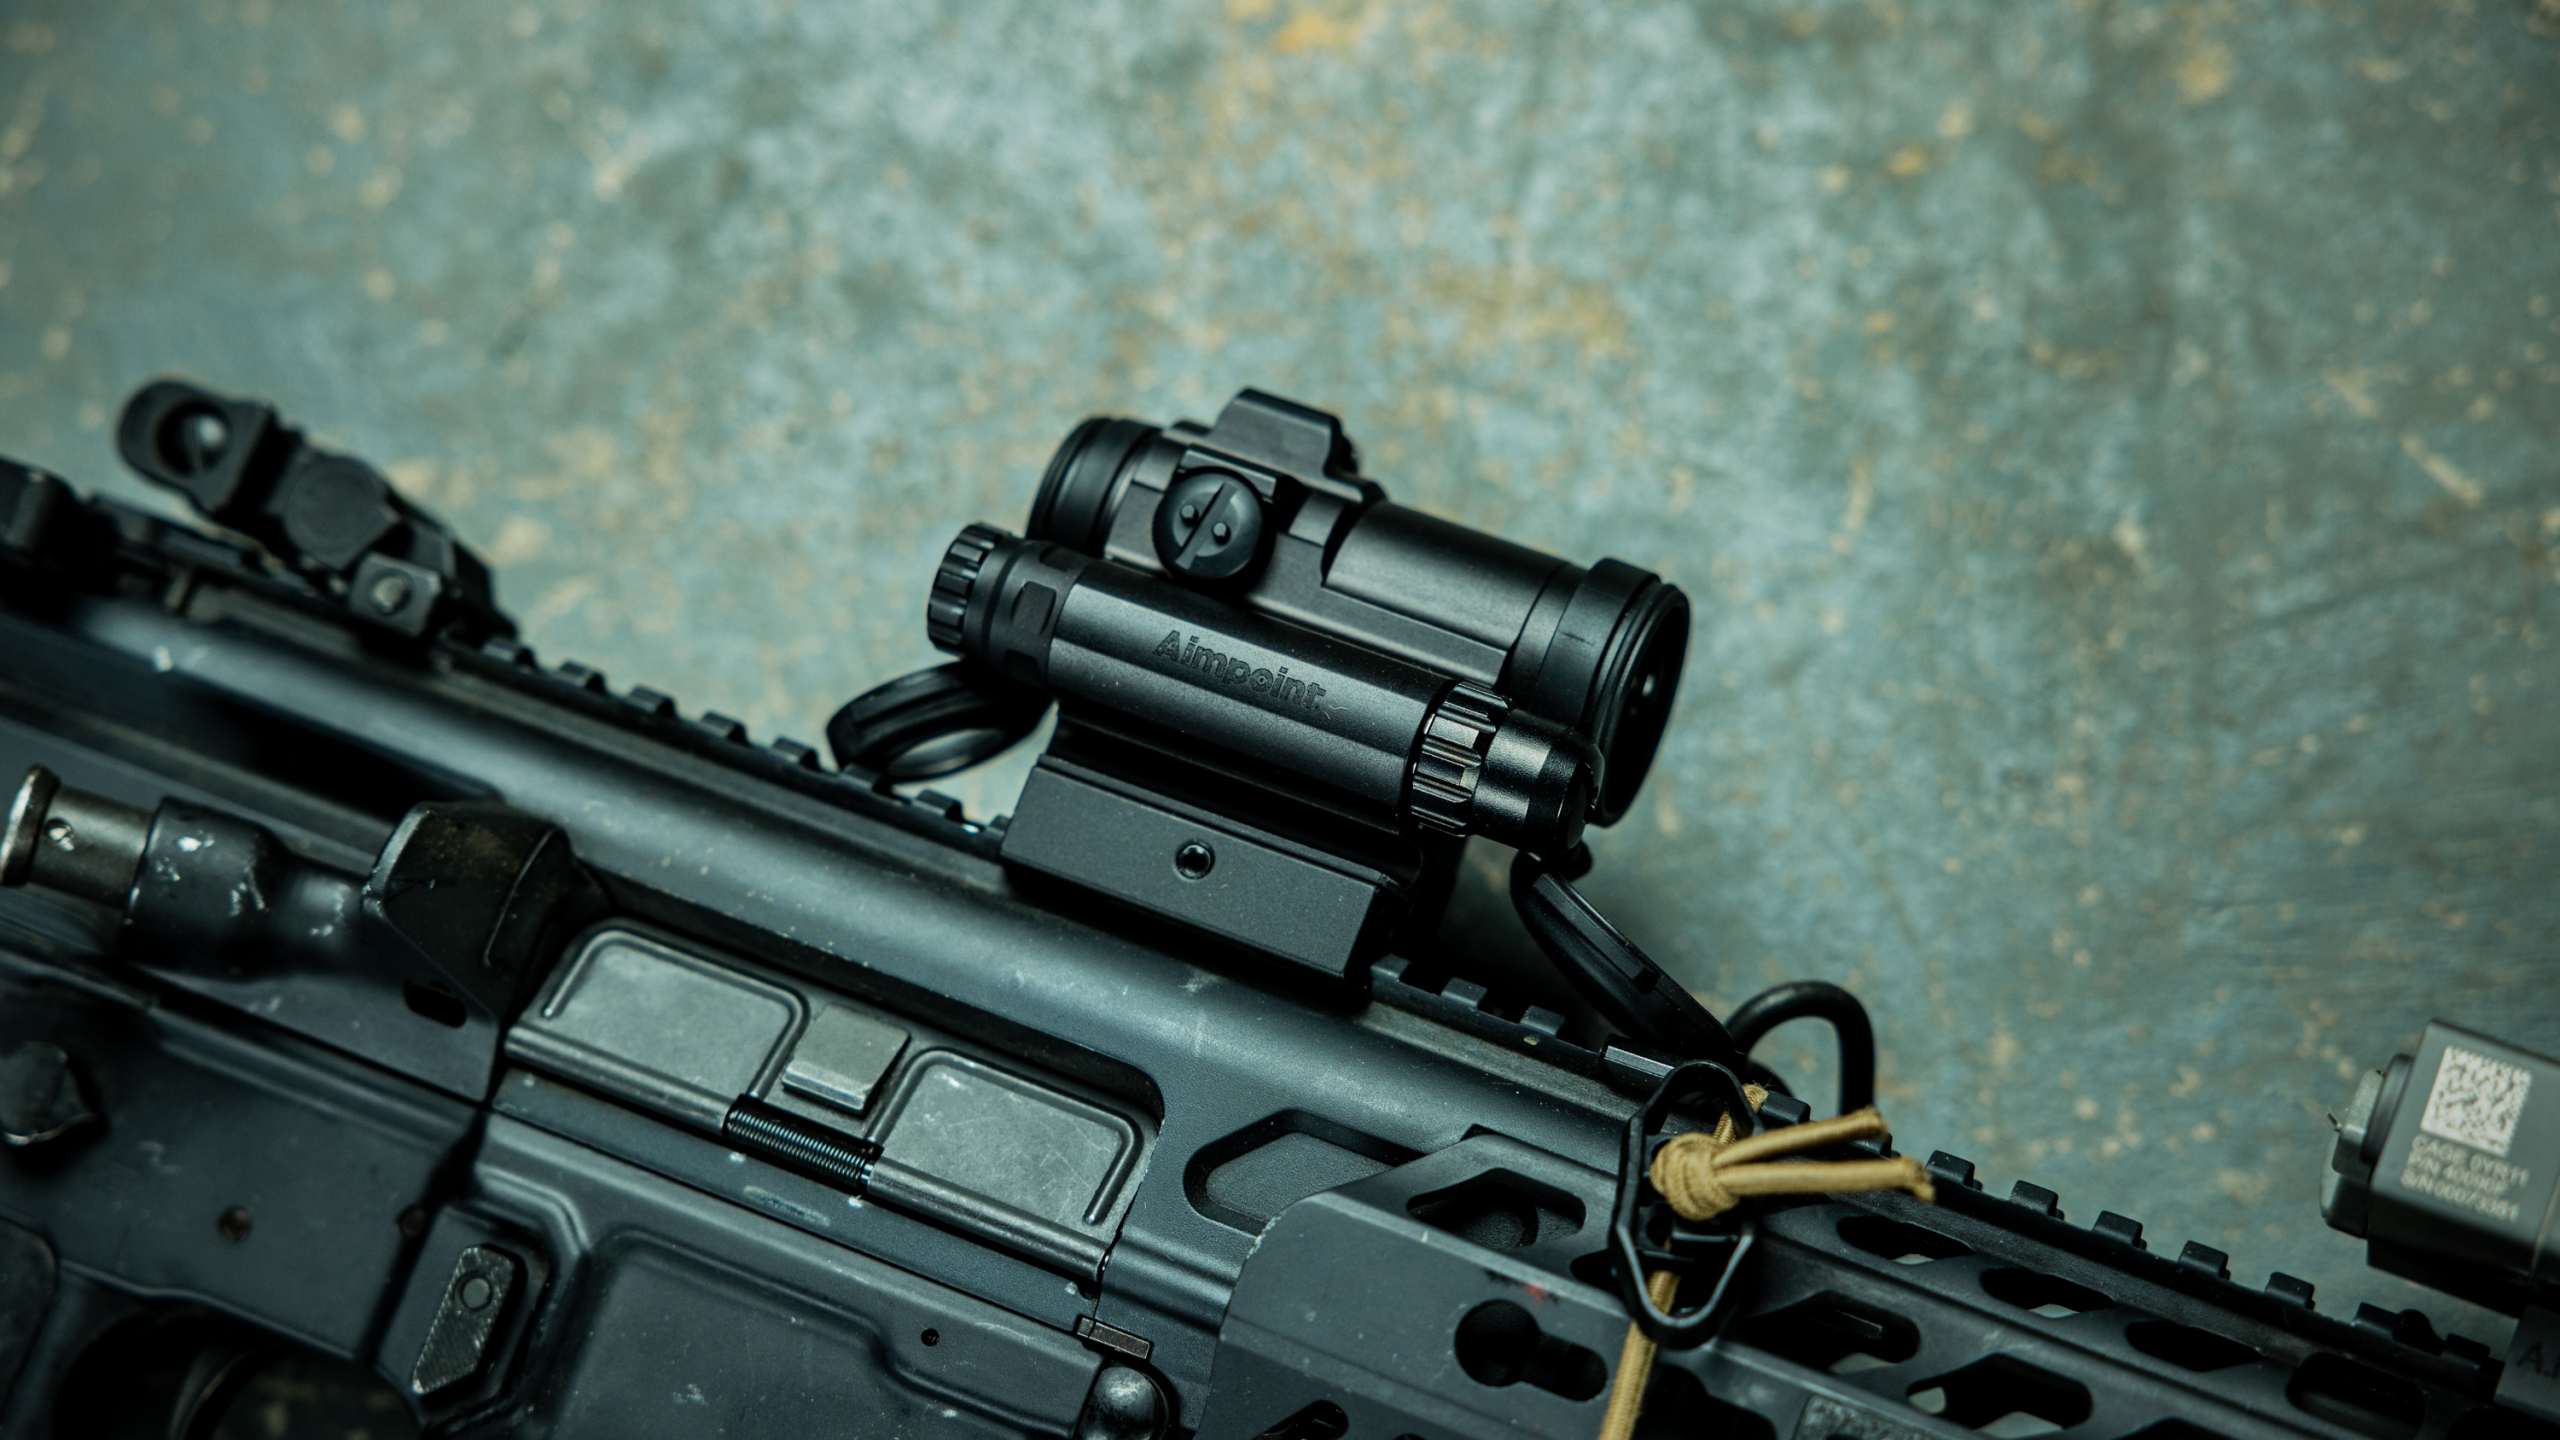 Aimpoint CompM4s Red Dot Sight – T.REX ARMS